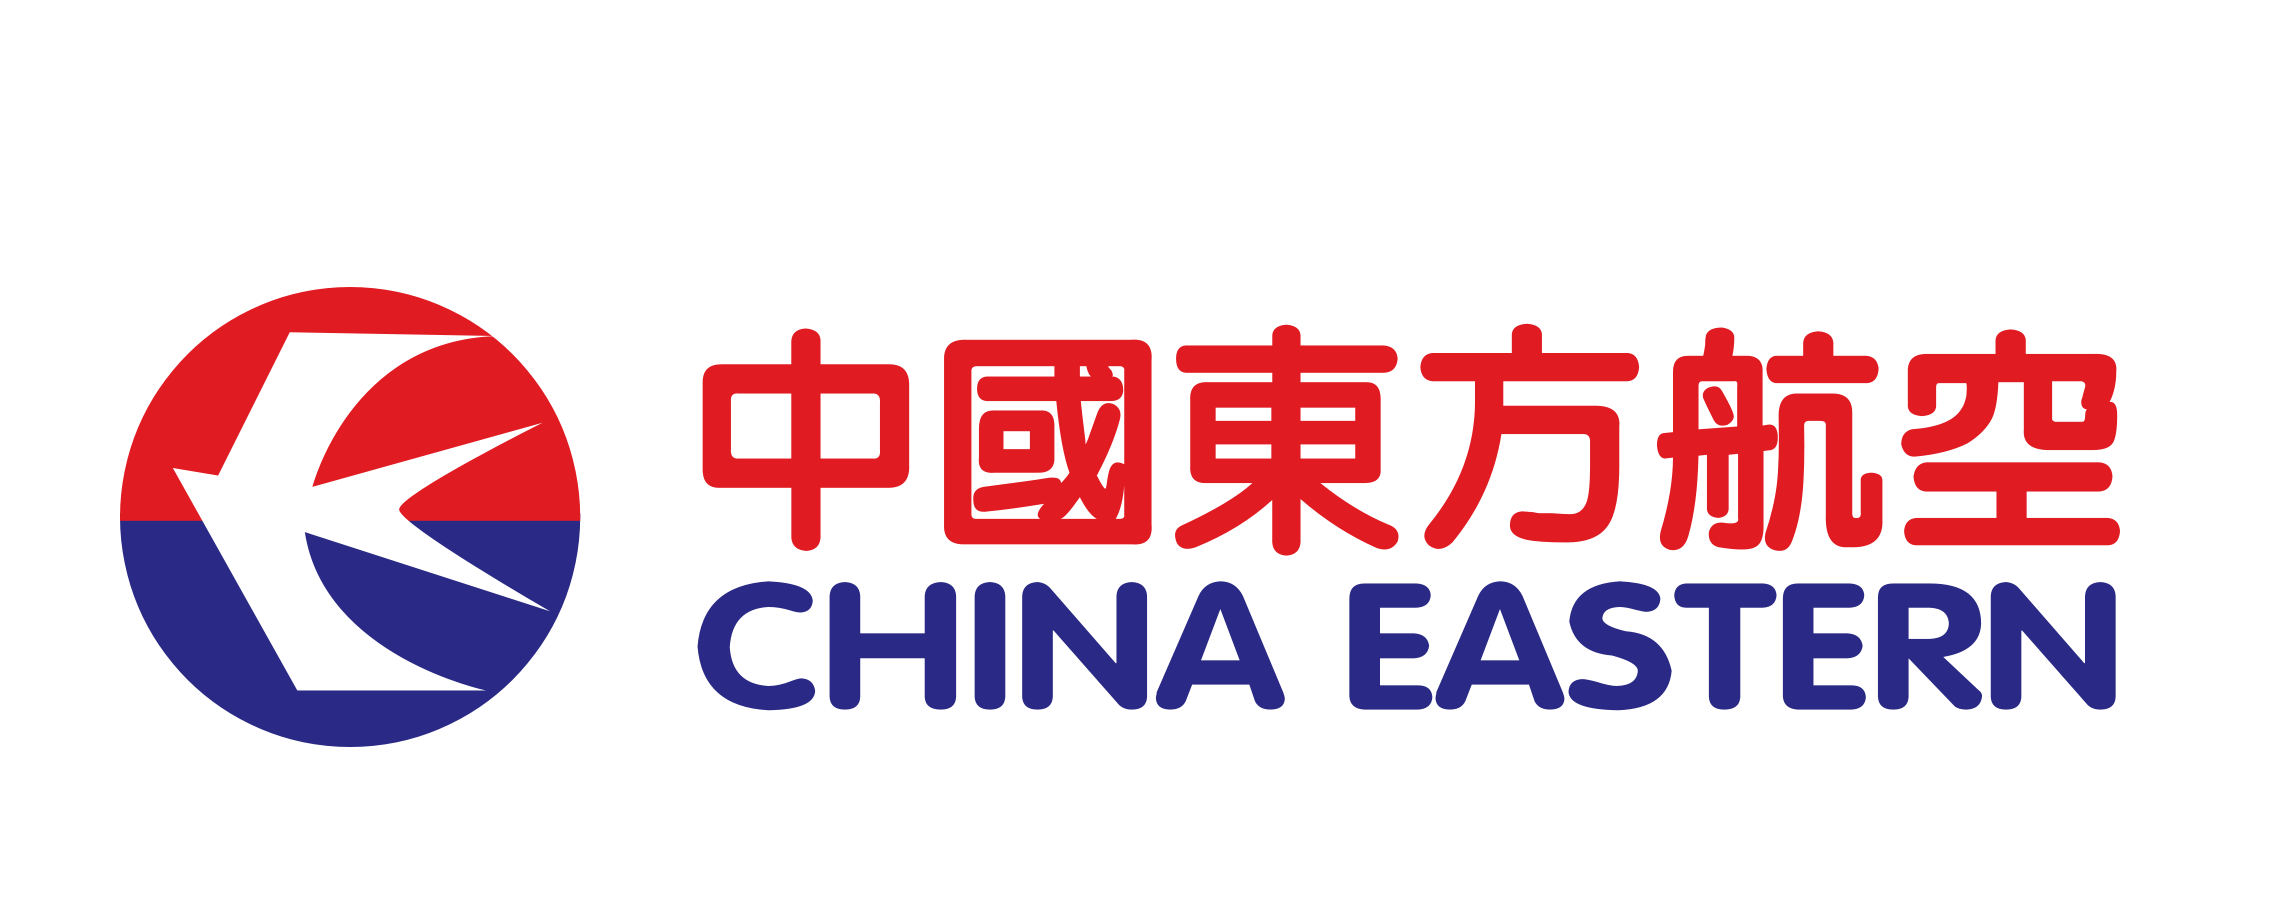 China Eastern Airlines - 9469